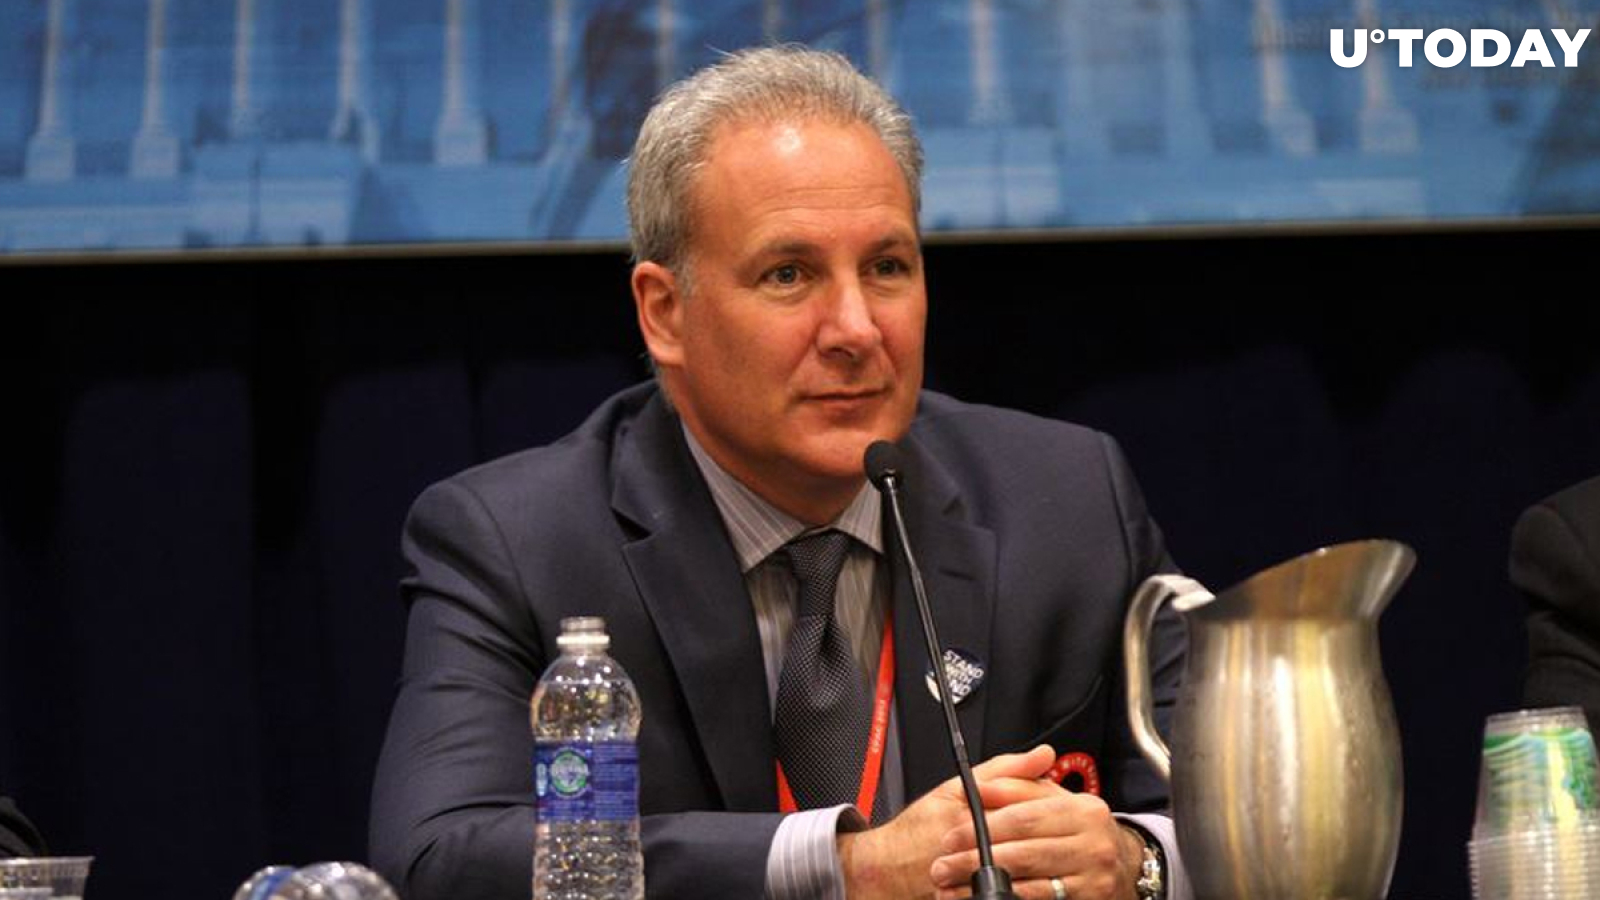 There Are Amazing Fundamentals for Bitcoin Now but It Won’t Rally: Peter Schiff